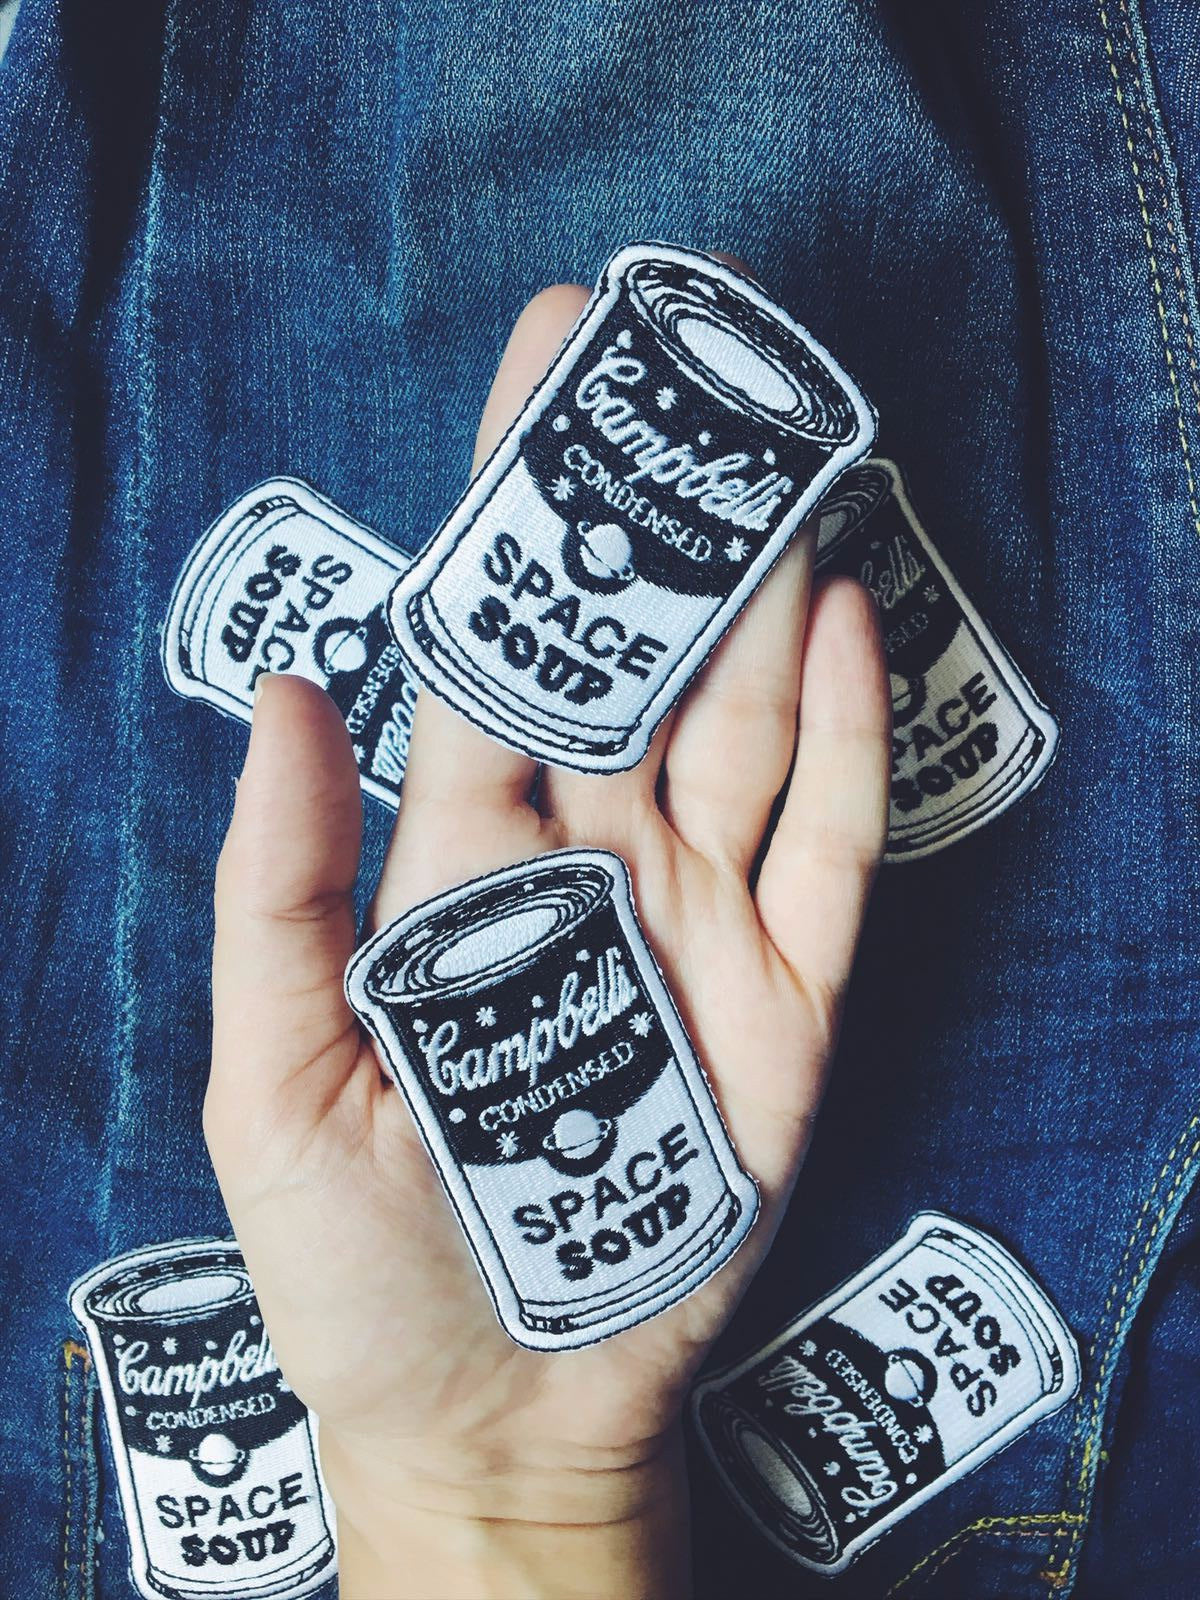 andy_warhole_soup_space_patch_hand_denim